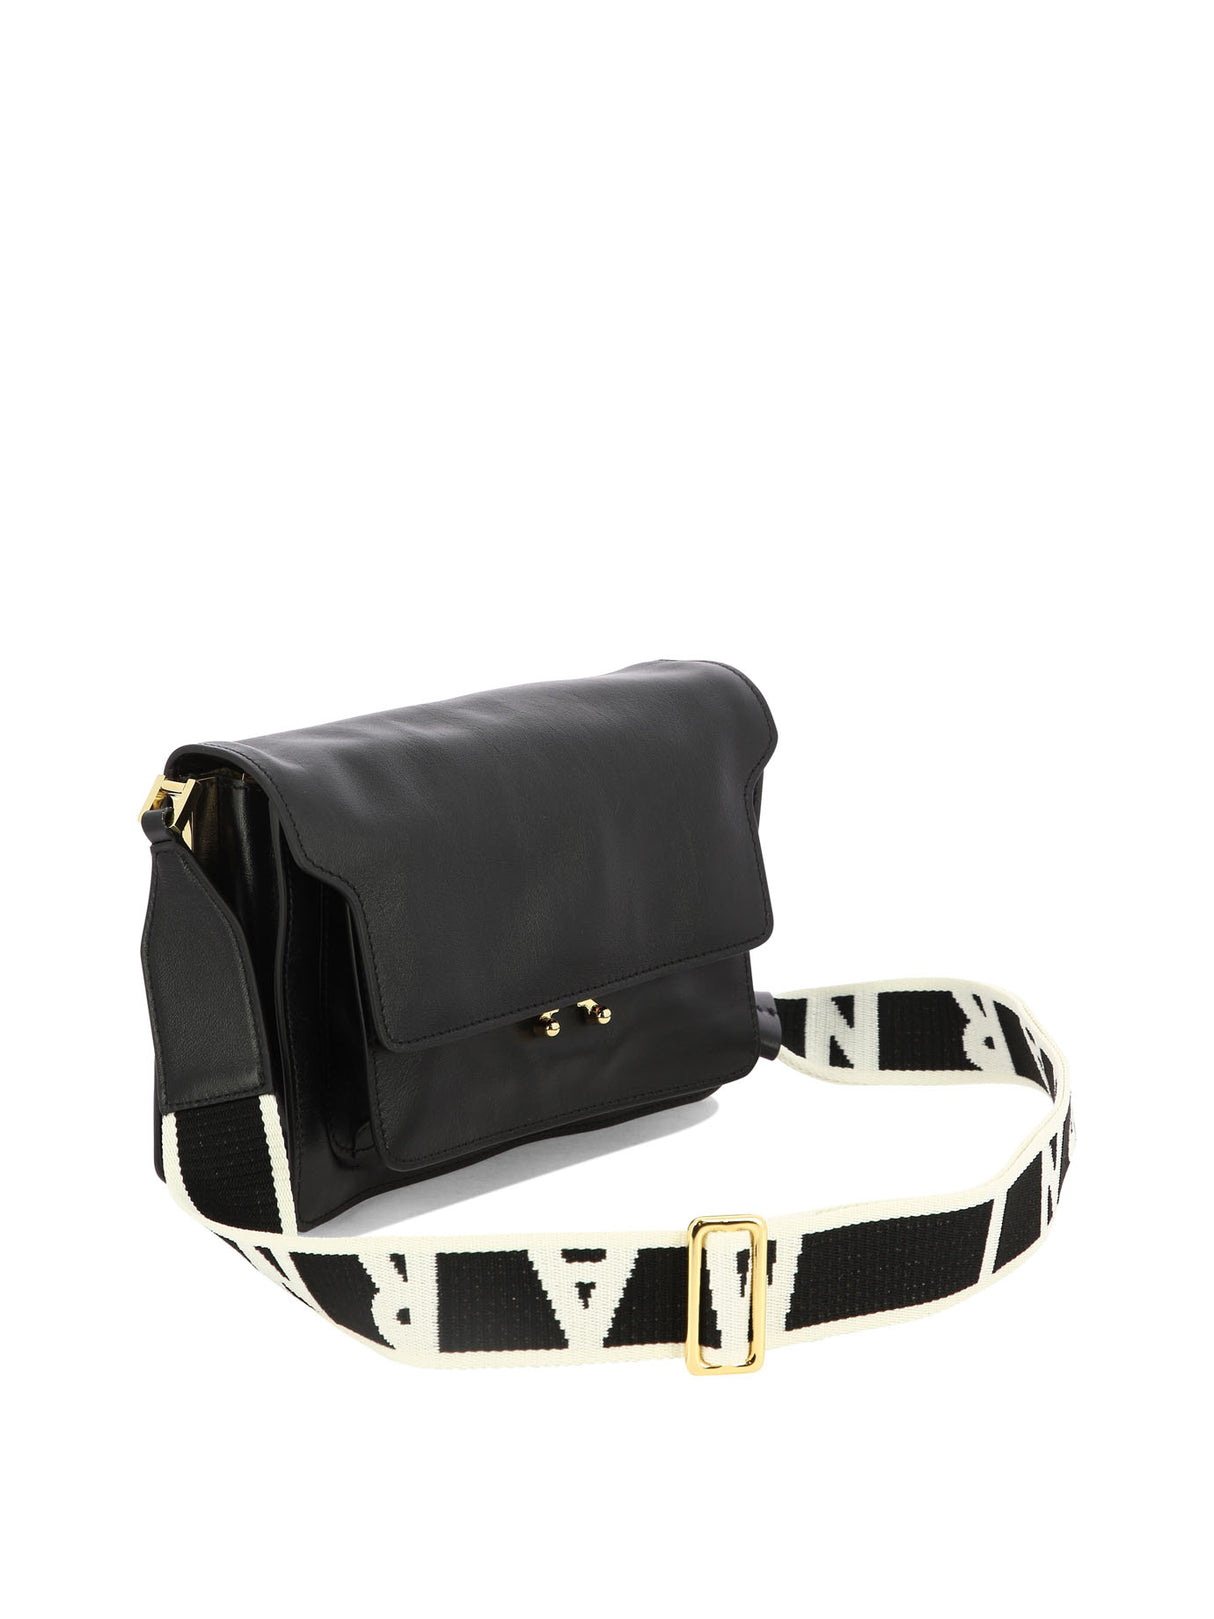 MARNI Classic Black Crossbody Bag for Women with Adjustable Leather Strap